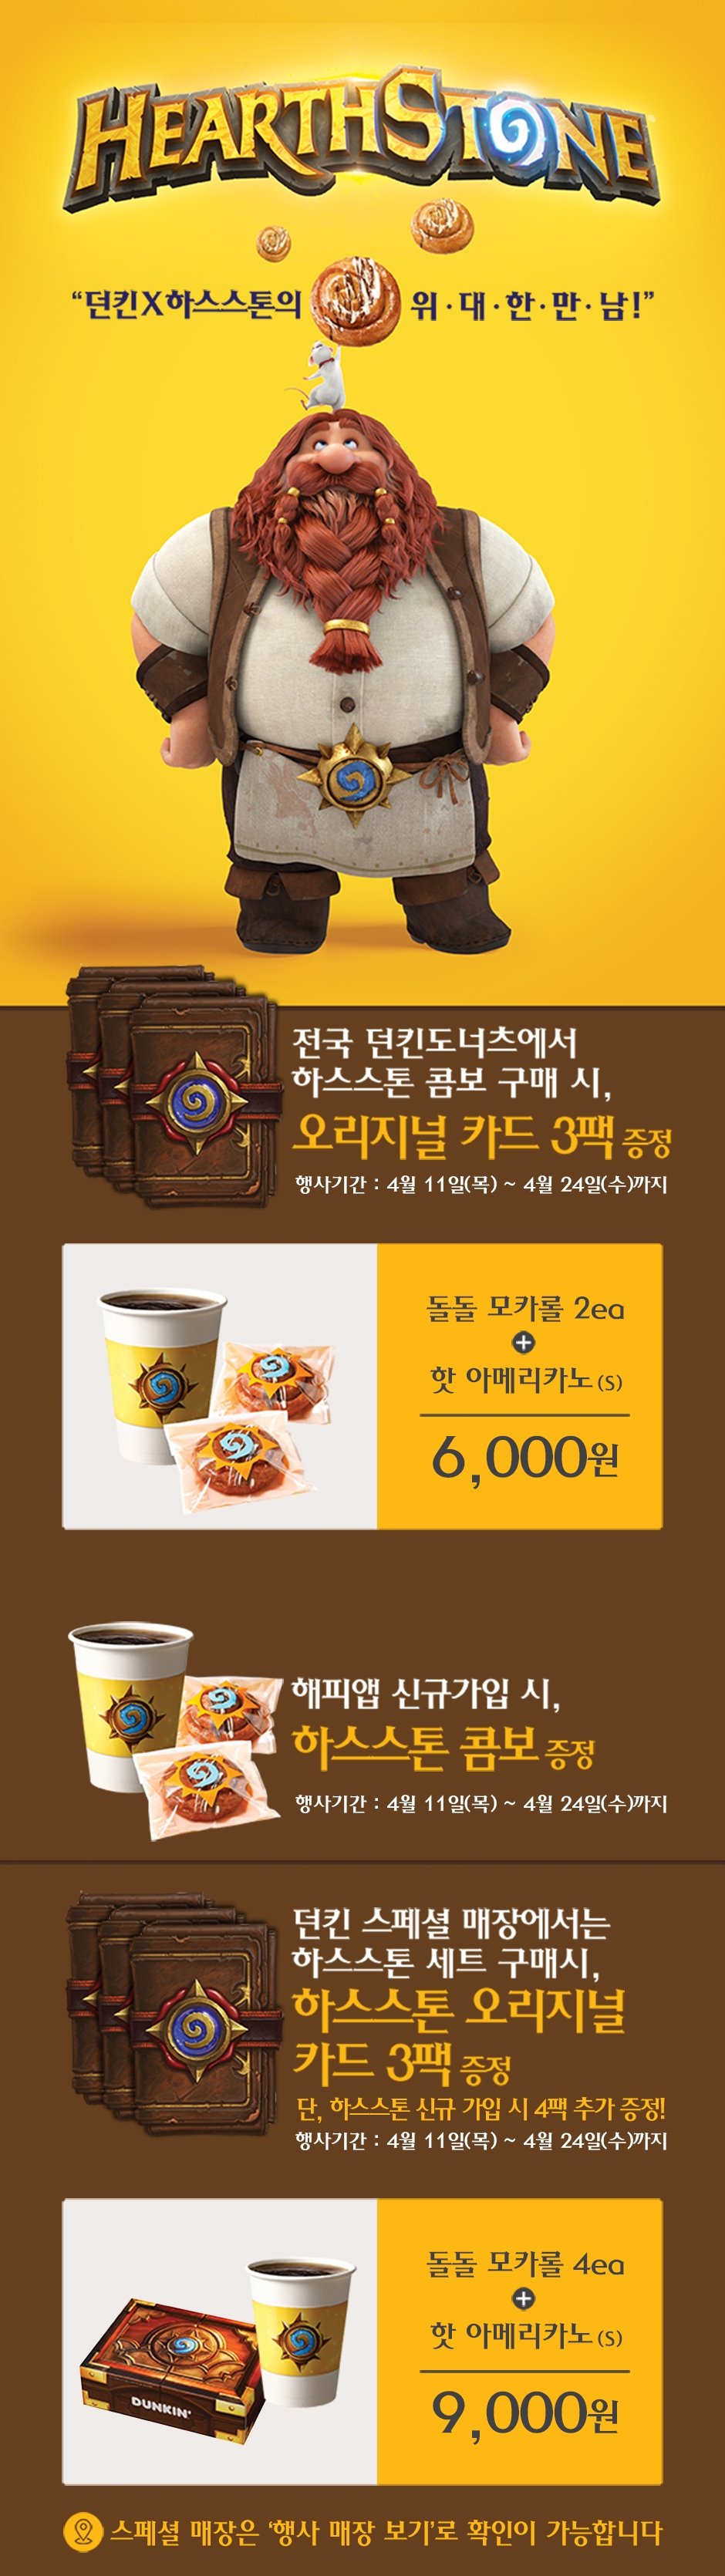 Hearthstone x Dunkin events image